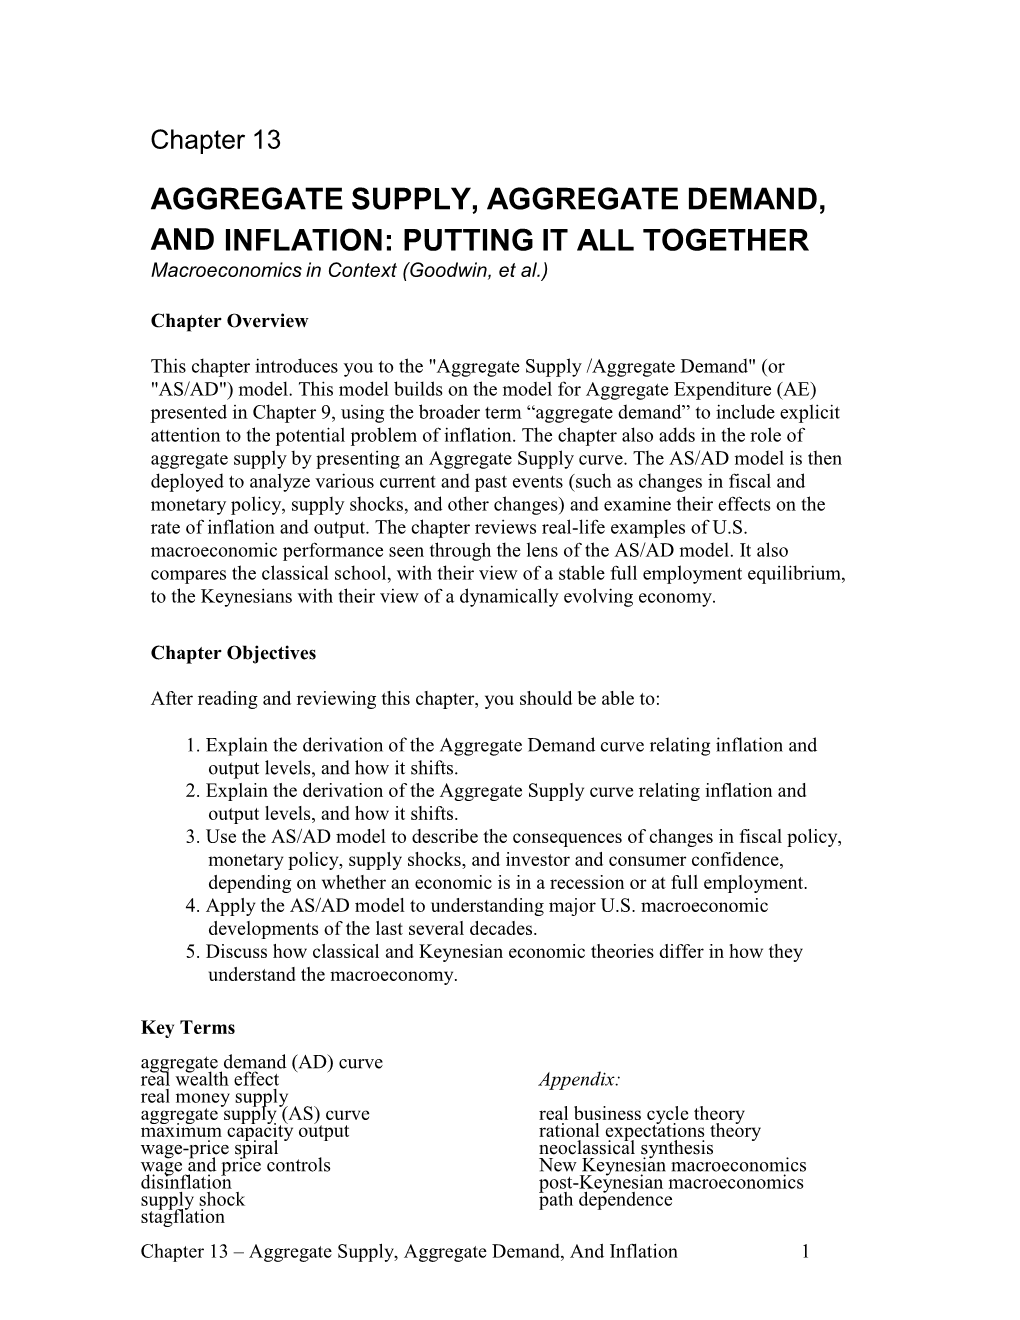 AGGREGATE SUPPLY, AGGREGATE DEMAND, and INFLATION: PUTTING IT ALL TOGETHER Macroeconomics in Context (Goodwin, Et Al.)